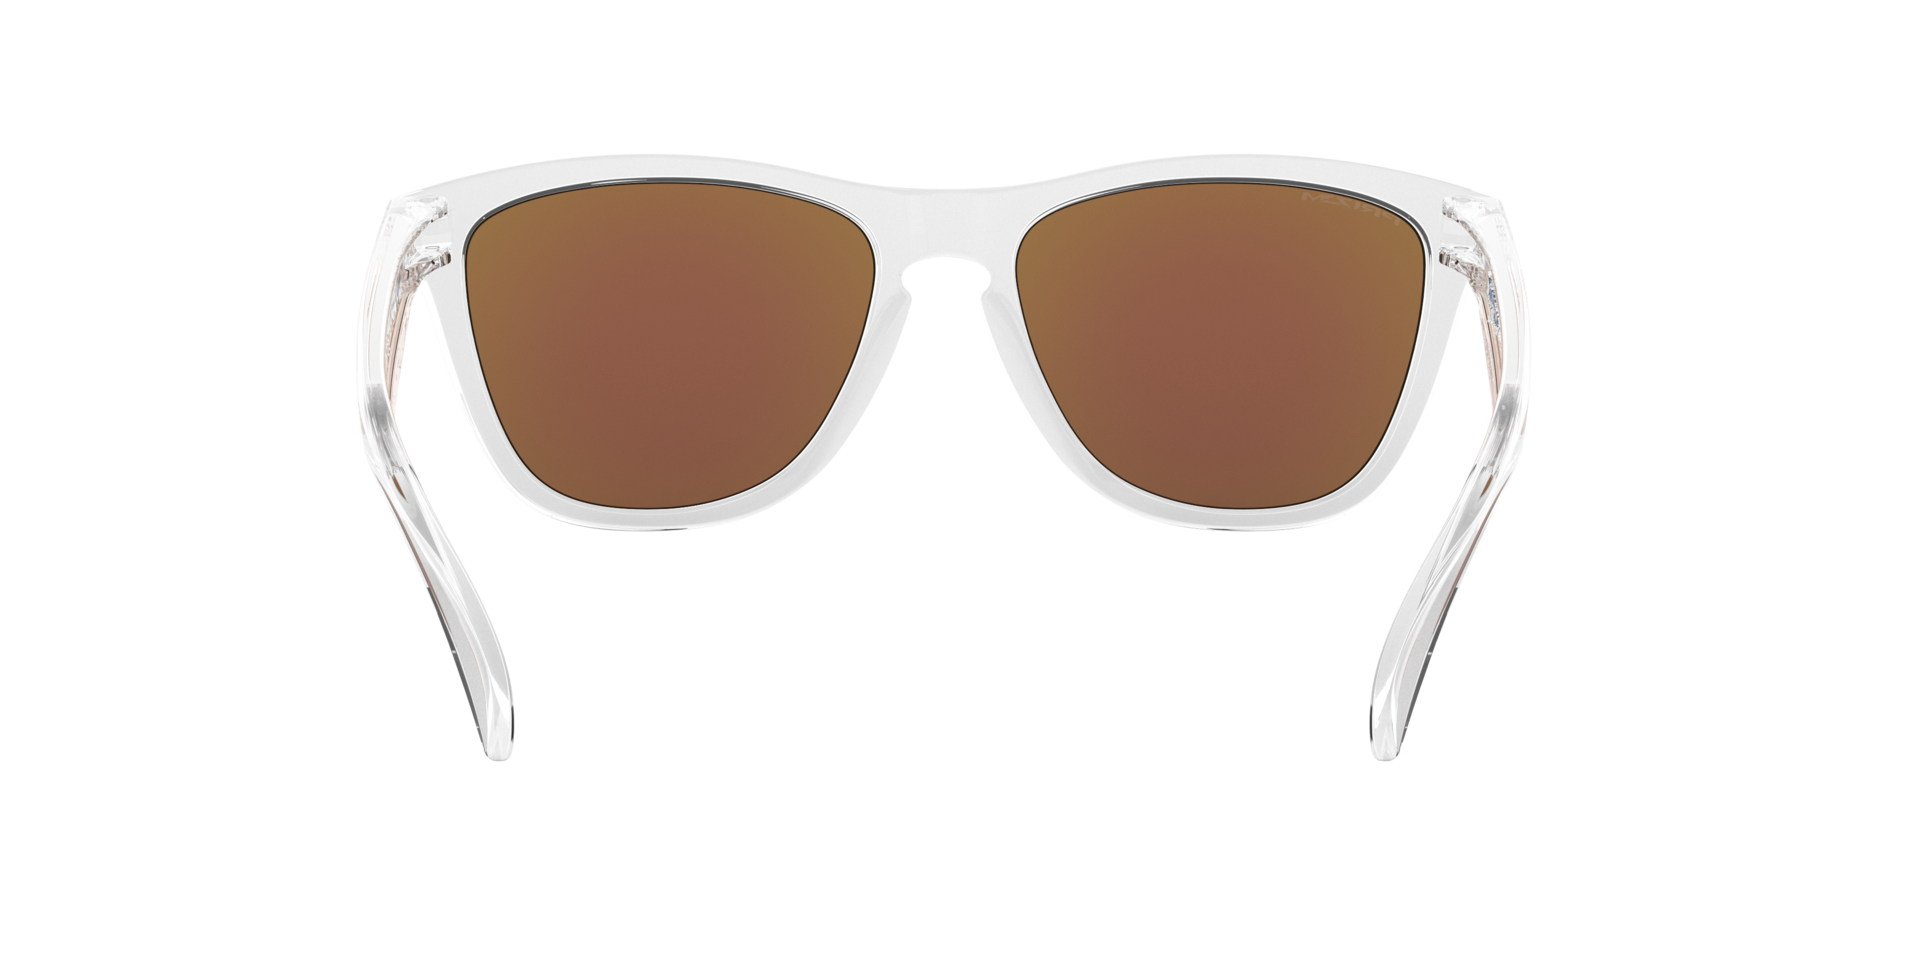 Frogskins - Crystal Clear - Prizm Sapphire